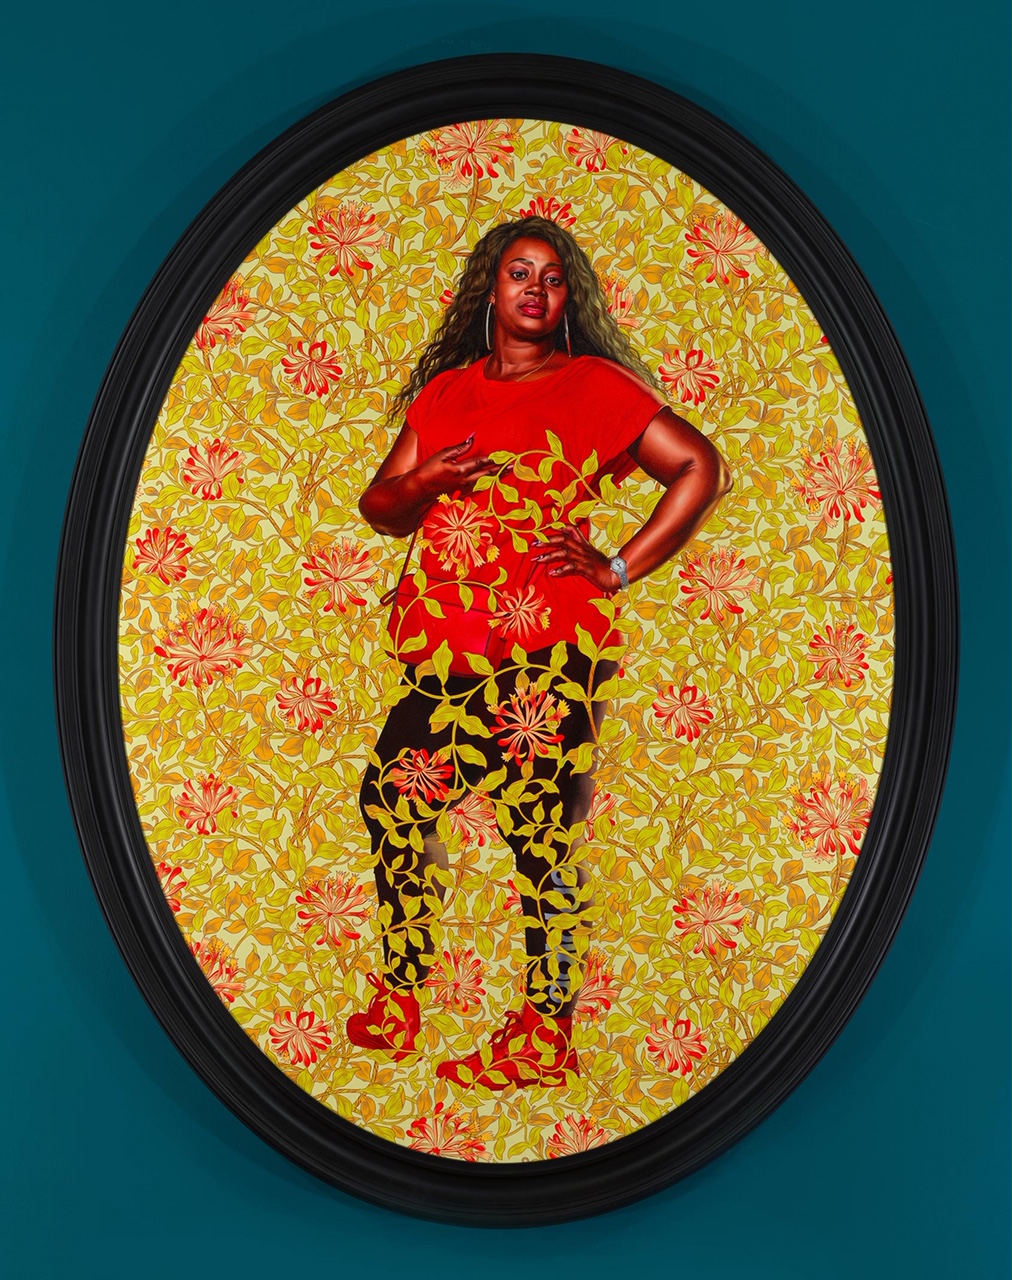 kehindewiley_the yellow wallpaper_Portrait of Quannah Noble